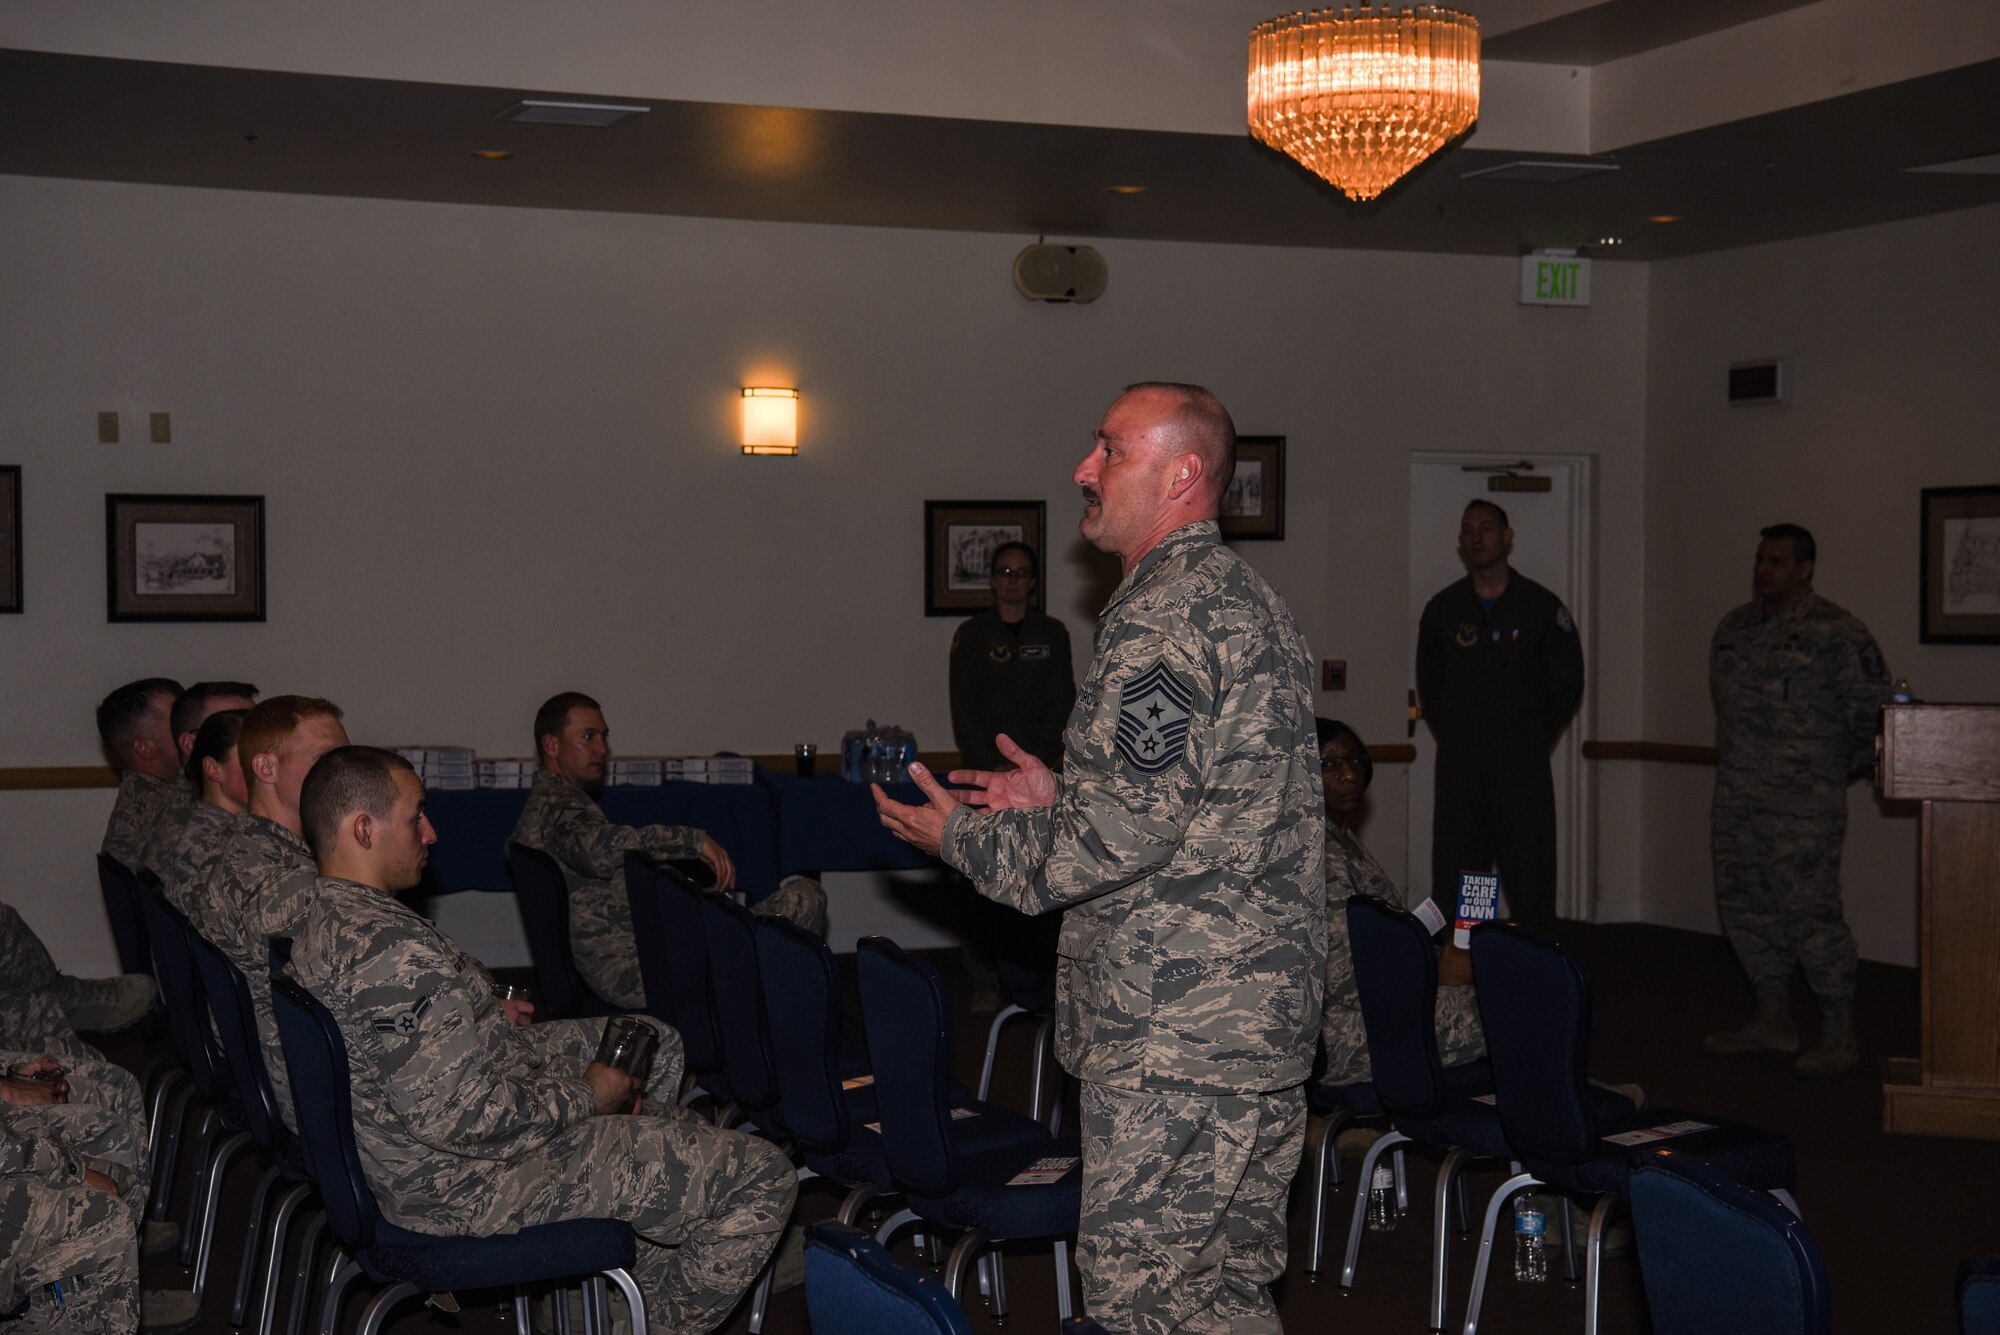 Chief Master Sgt. Kristian Farve, 90th Missile Wing command chief, speaks to the crowd during the Air Force Assistance Fund kickoff event at F.E. Warren Air Force Base, Wyo., March 30, 2018. This year’s AFAF goal is to raise $47,140. AFAF helps Airmen with financial aid in instances such as, emergency situations, securing a retirement home for widows or widowers of Air Force members and more. (U.S. Air Force photo by Airman 1st Class Braydon Williams)